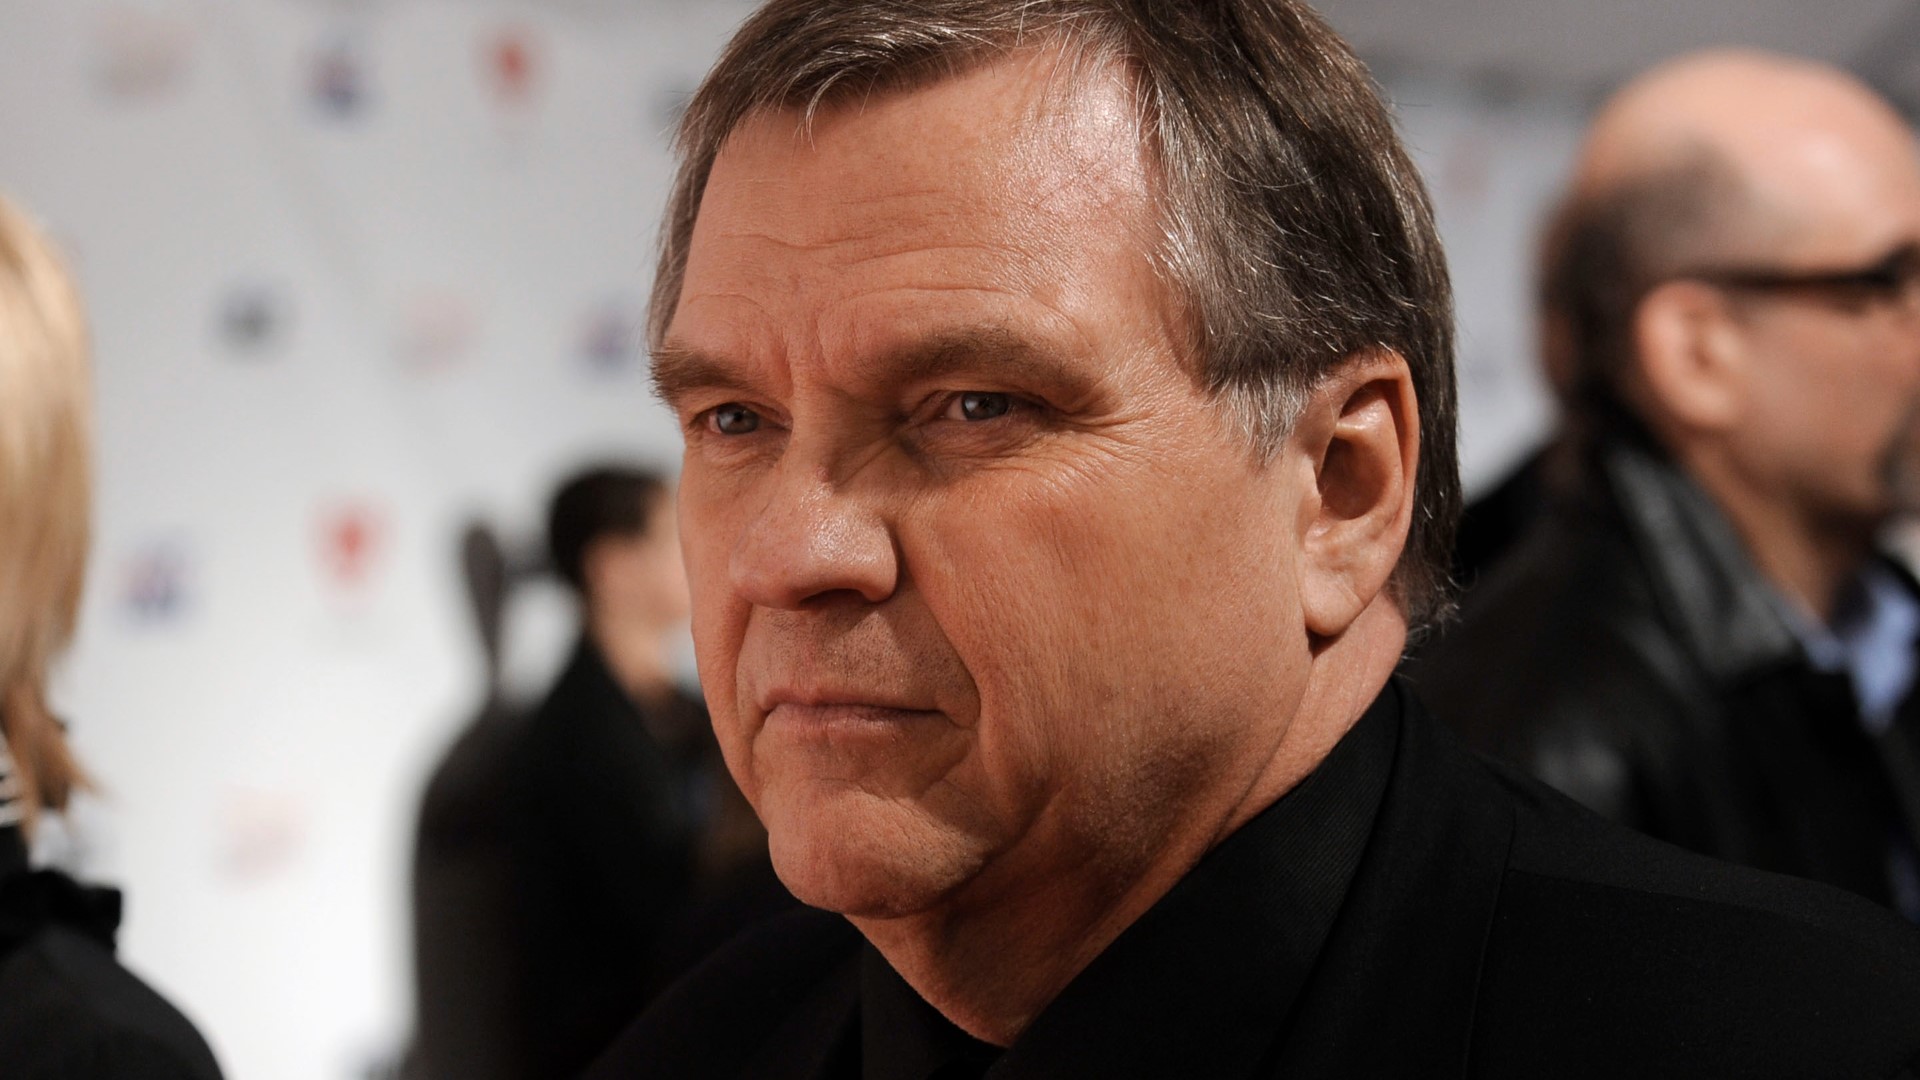 Meat Loaf, born Michael Lee Aday, was a Dallas native and well-known actor, singer and songwriter.